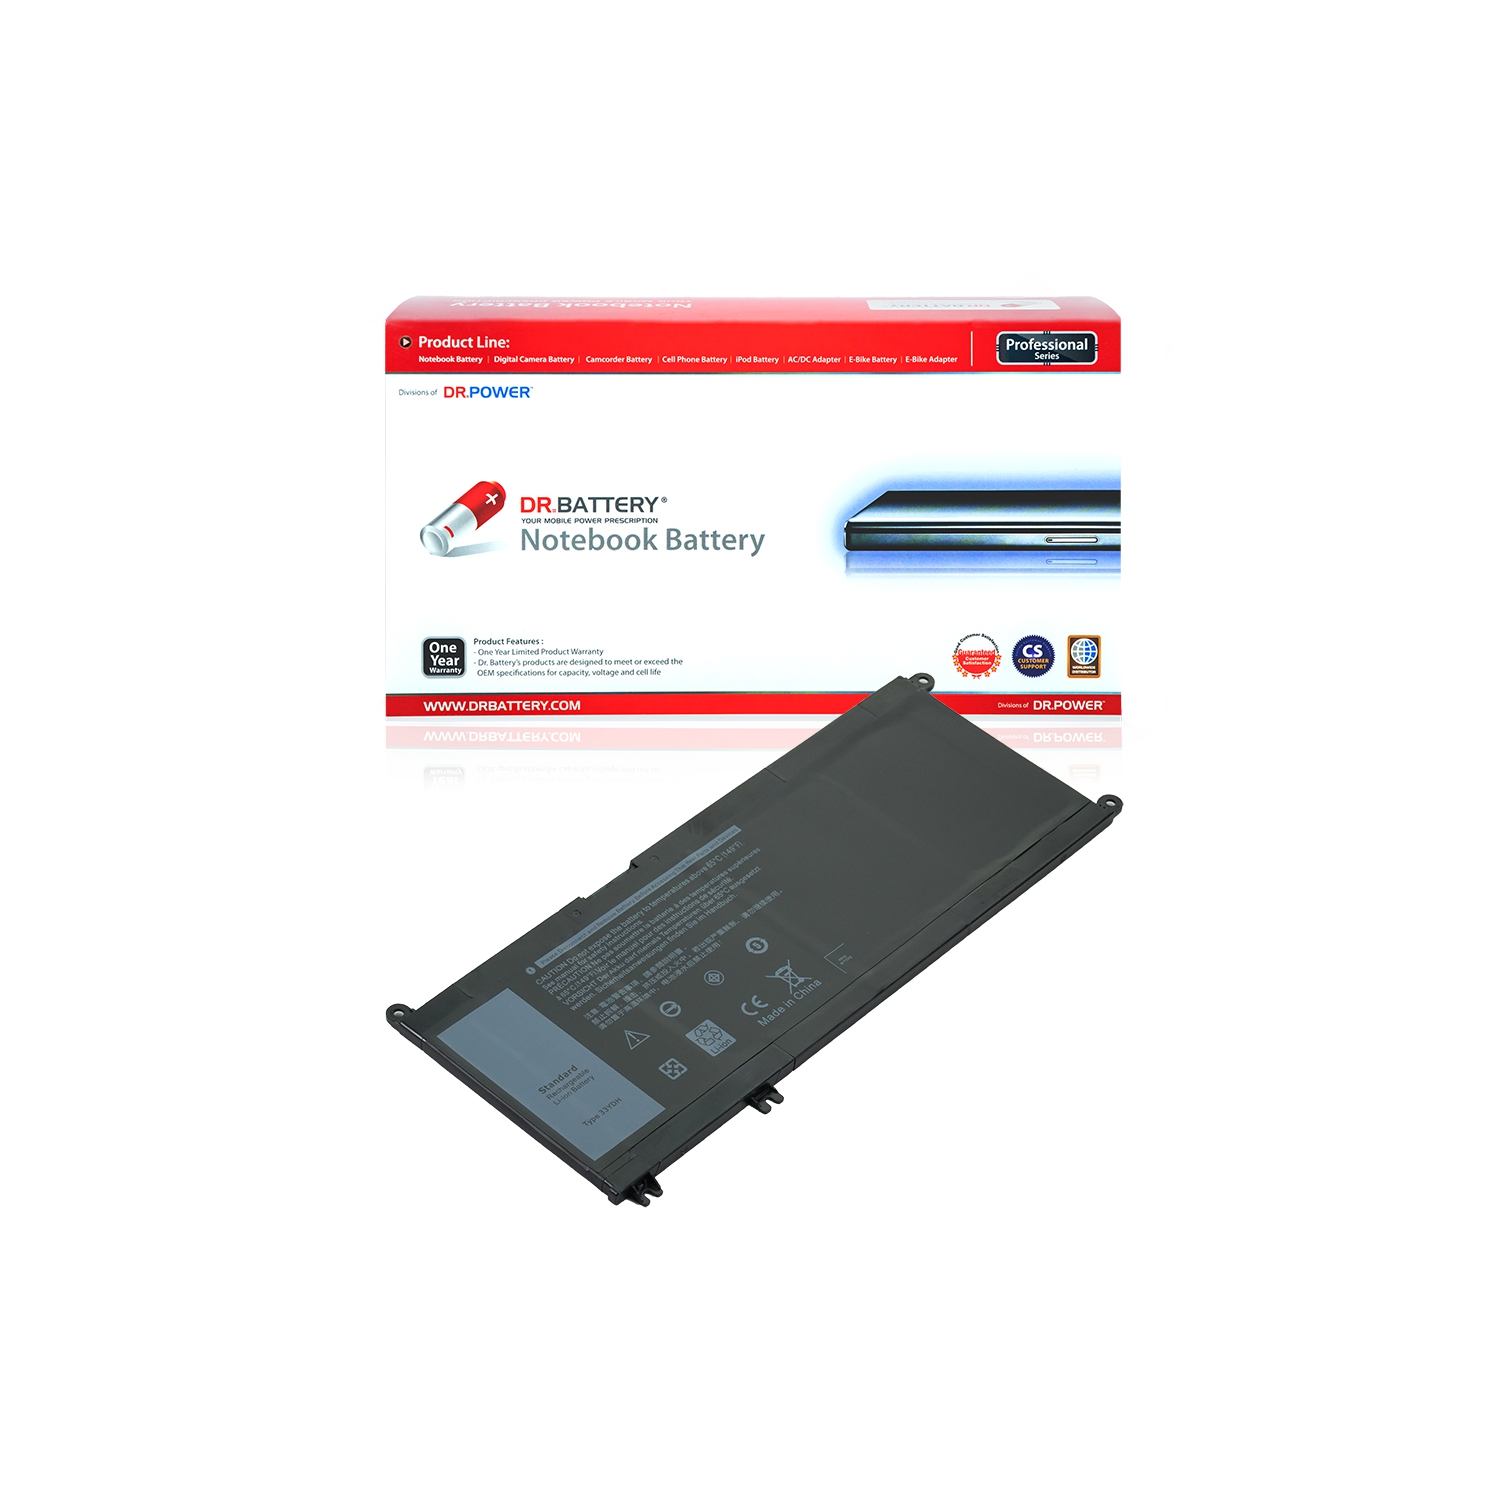 DR. BATTERY - Replacement for Dell G3 17 Inspiron 17 7778 / Inspiron 7778 / 3779 / G5 15 5587 / 0PVHT1 / 33YDH / 81PF3